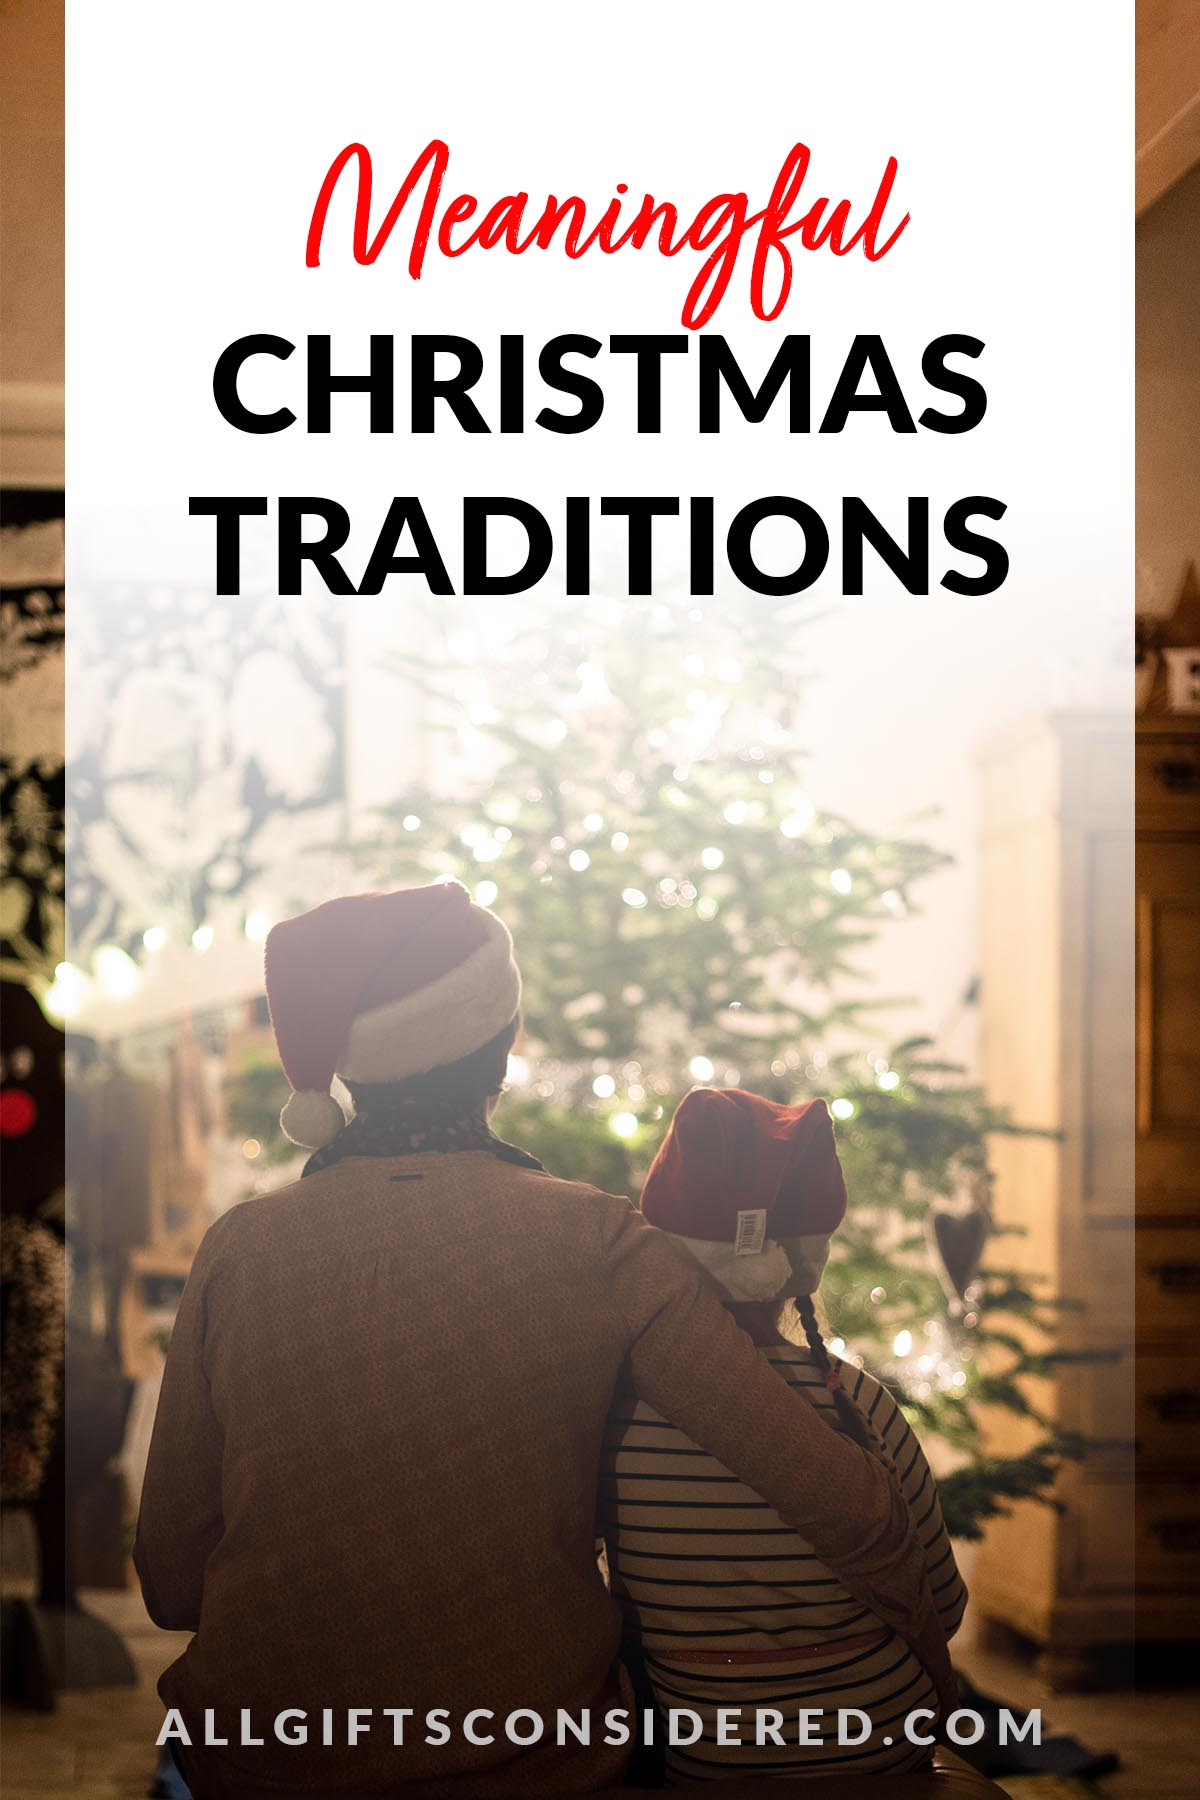 meaningful Christmas traditions - feat image